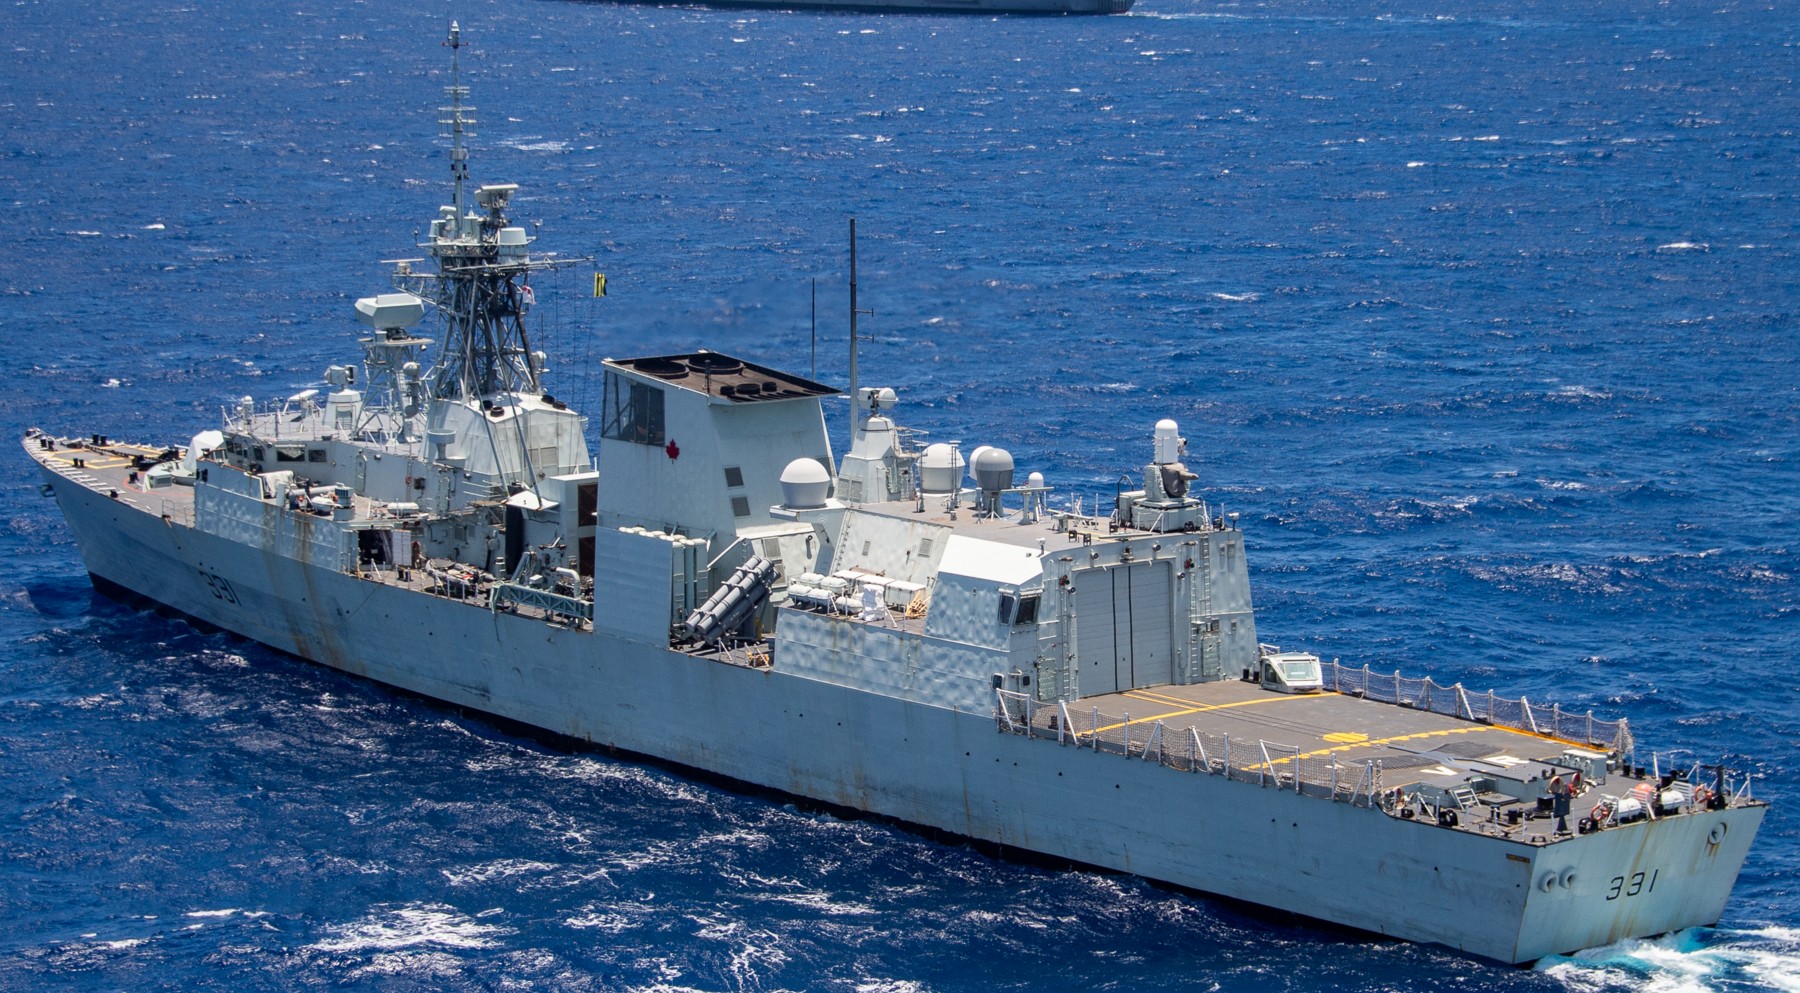 ffh-331 hmcs vancouver halifax class helicopter patrol frigate ncsm royal canadian navy 17